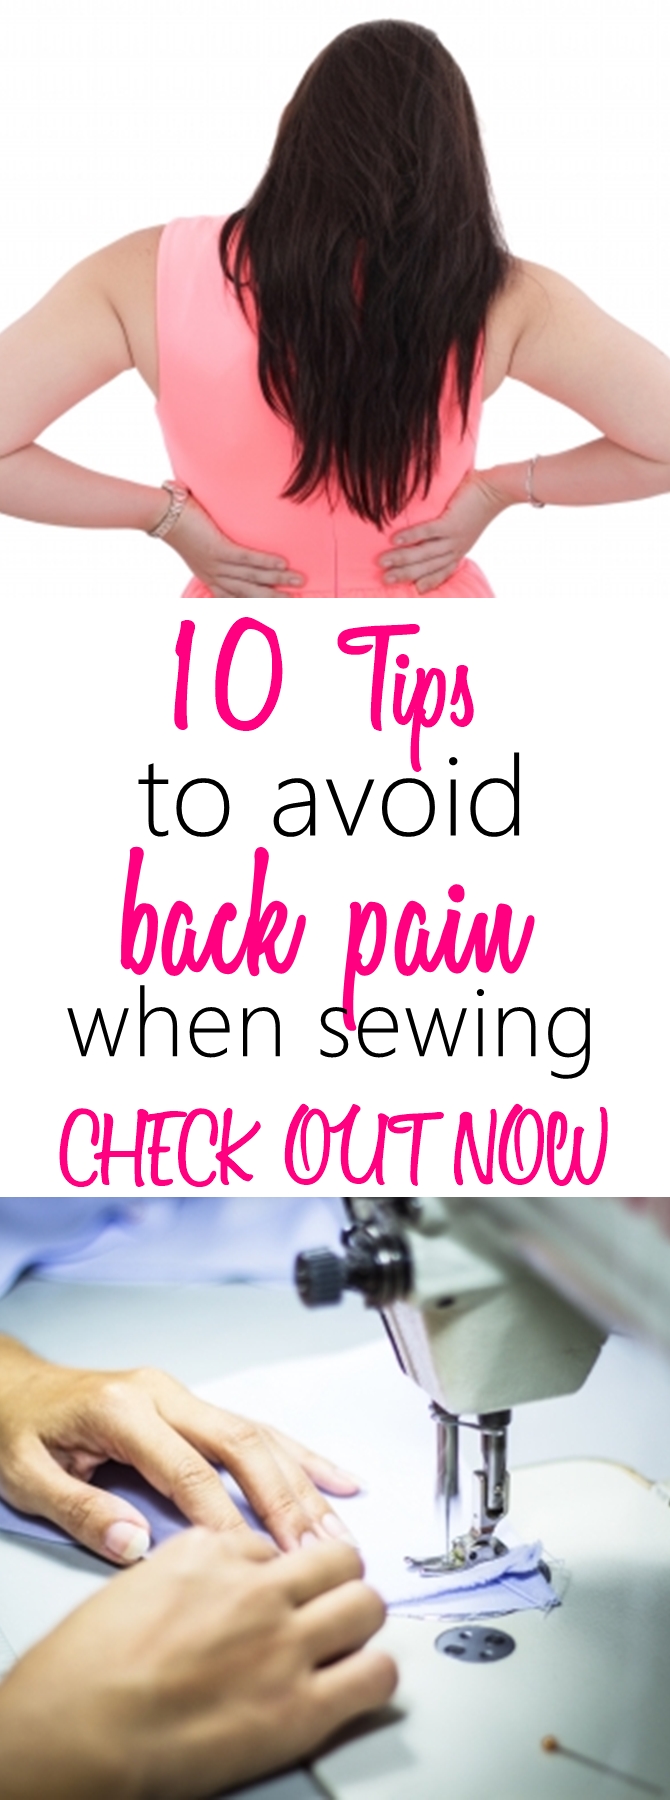 10 tips to avoid back pain while sewing. Suffering from severe back pain because of sewing but don't want to quit your favorite hobby? Check out these TRIED AND TRUE tips. READ NOW